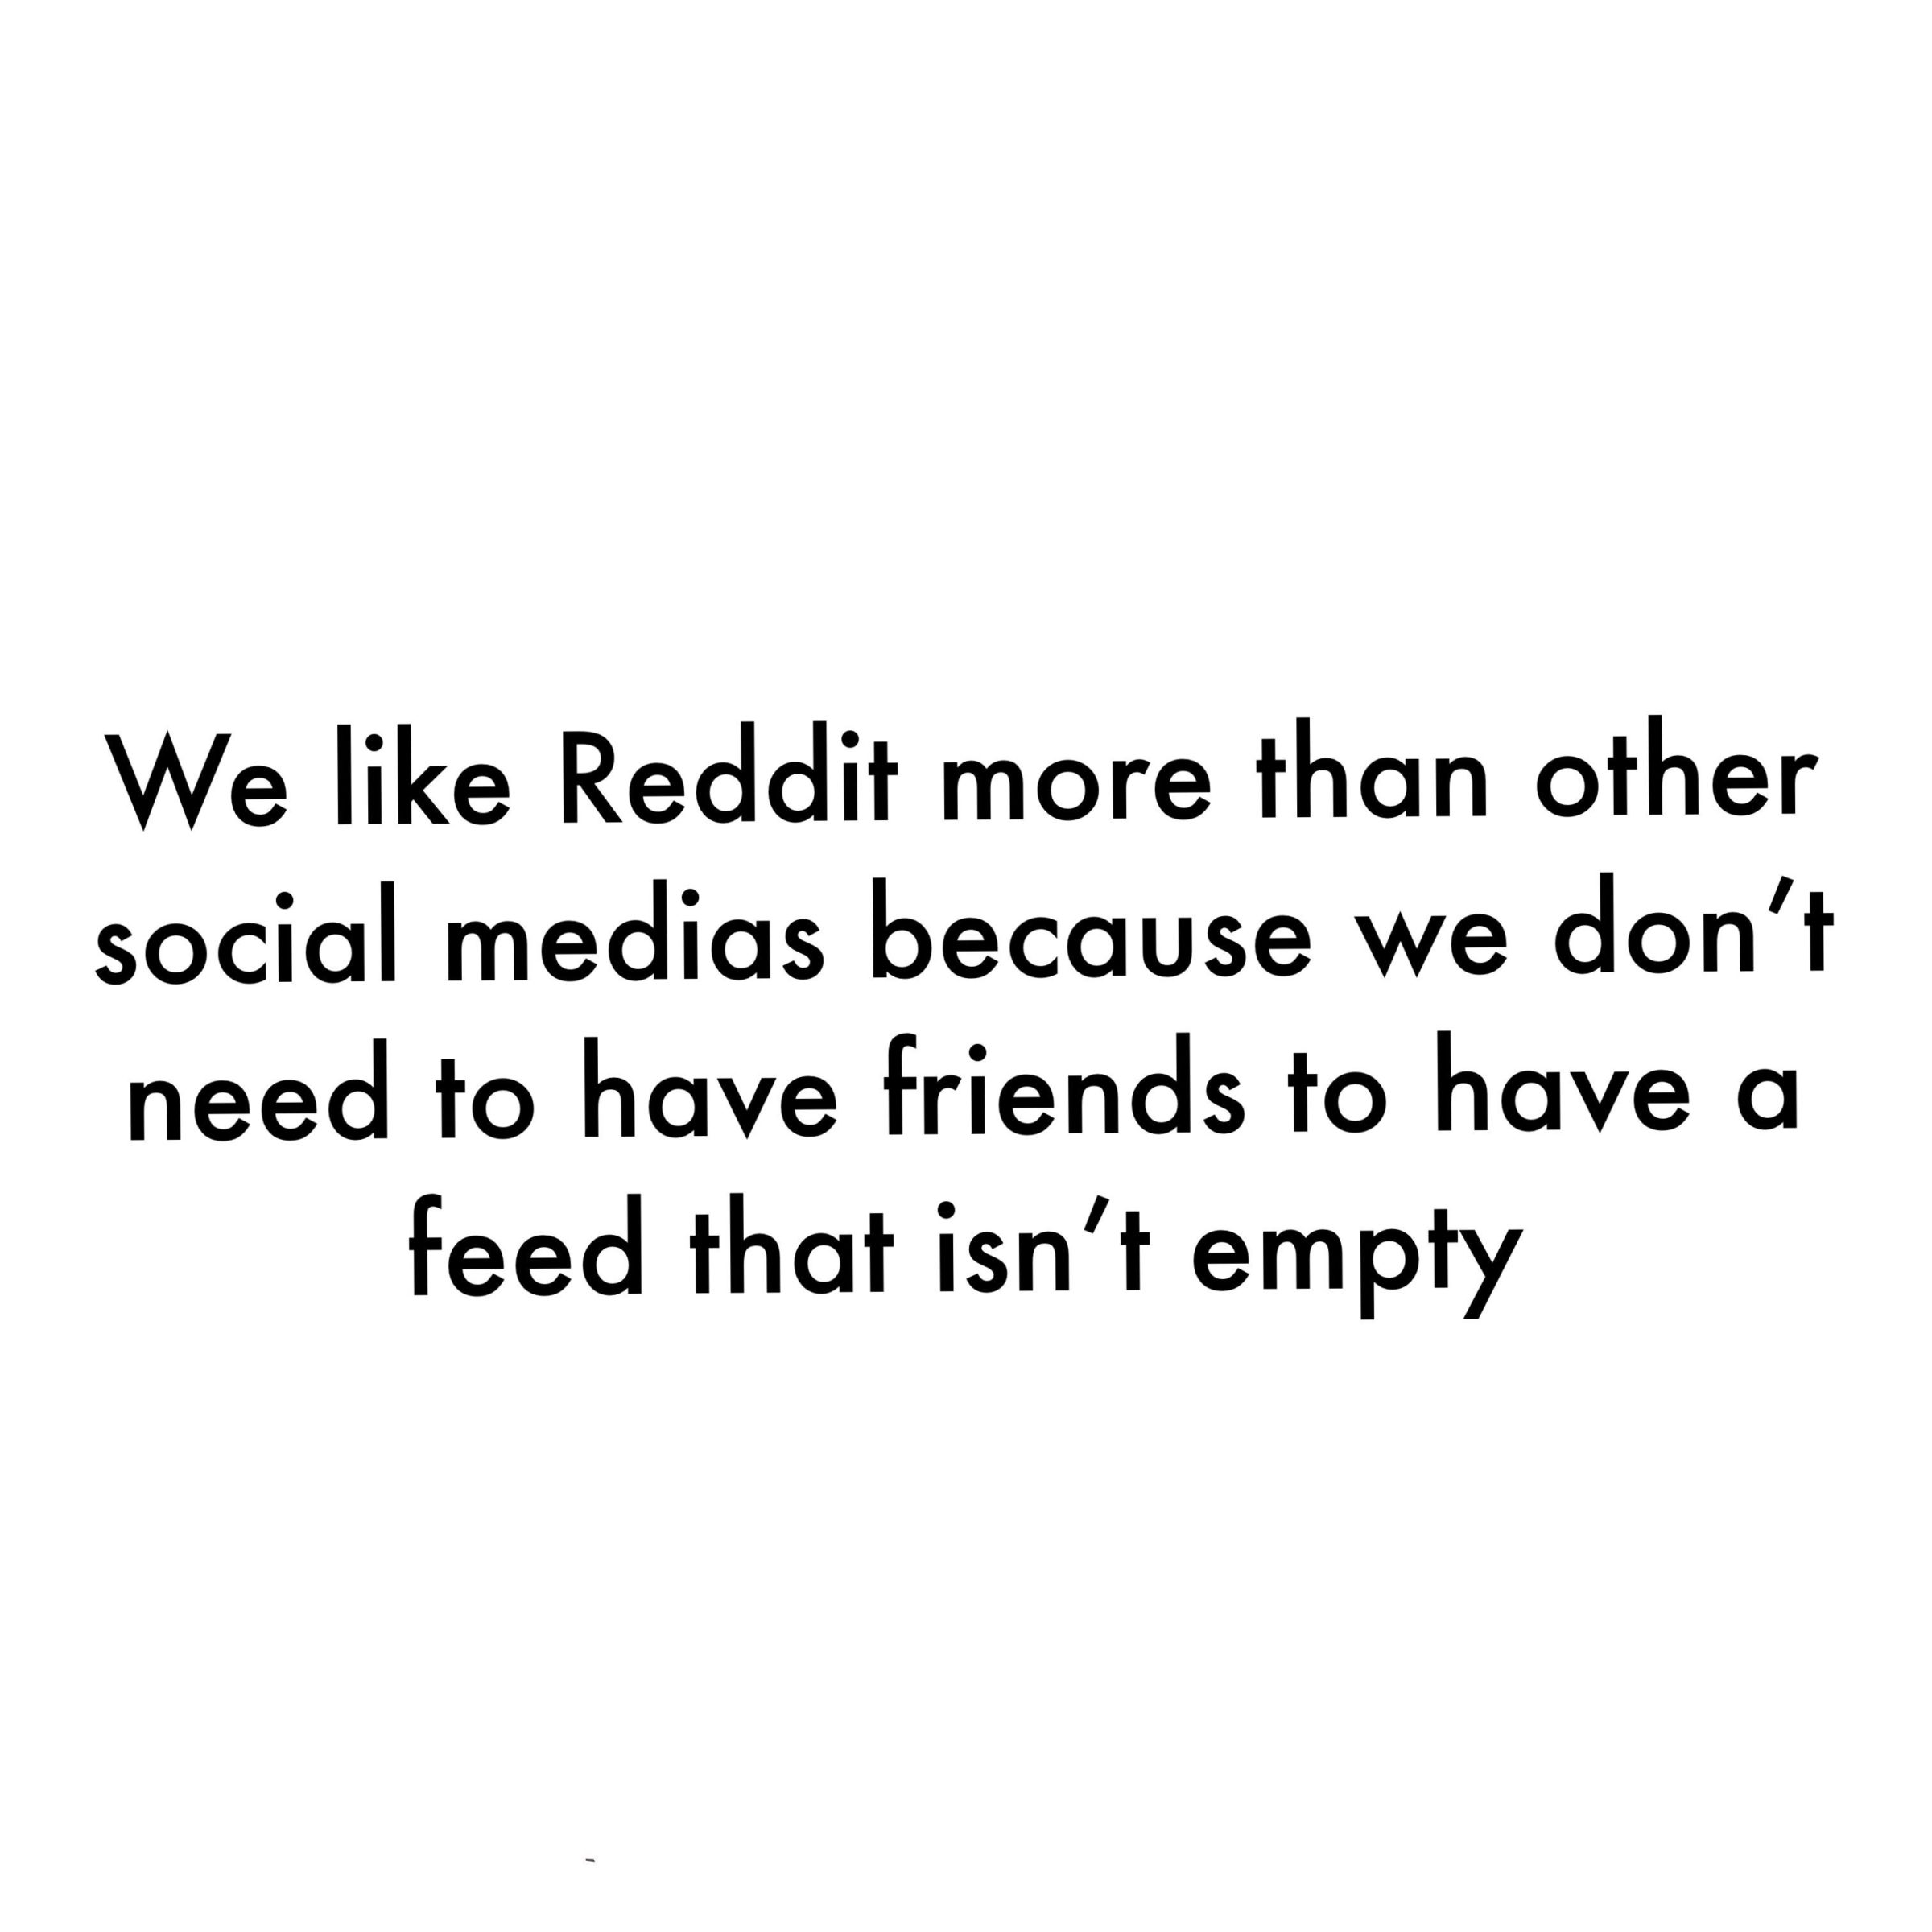 depression depression-memes depression text: We like Reddit more than other social medias because we don't need to have friends to have a feed that isn't empty 